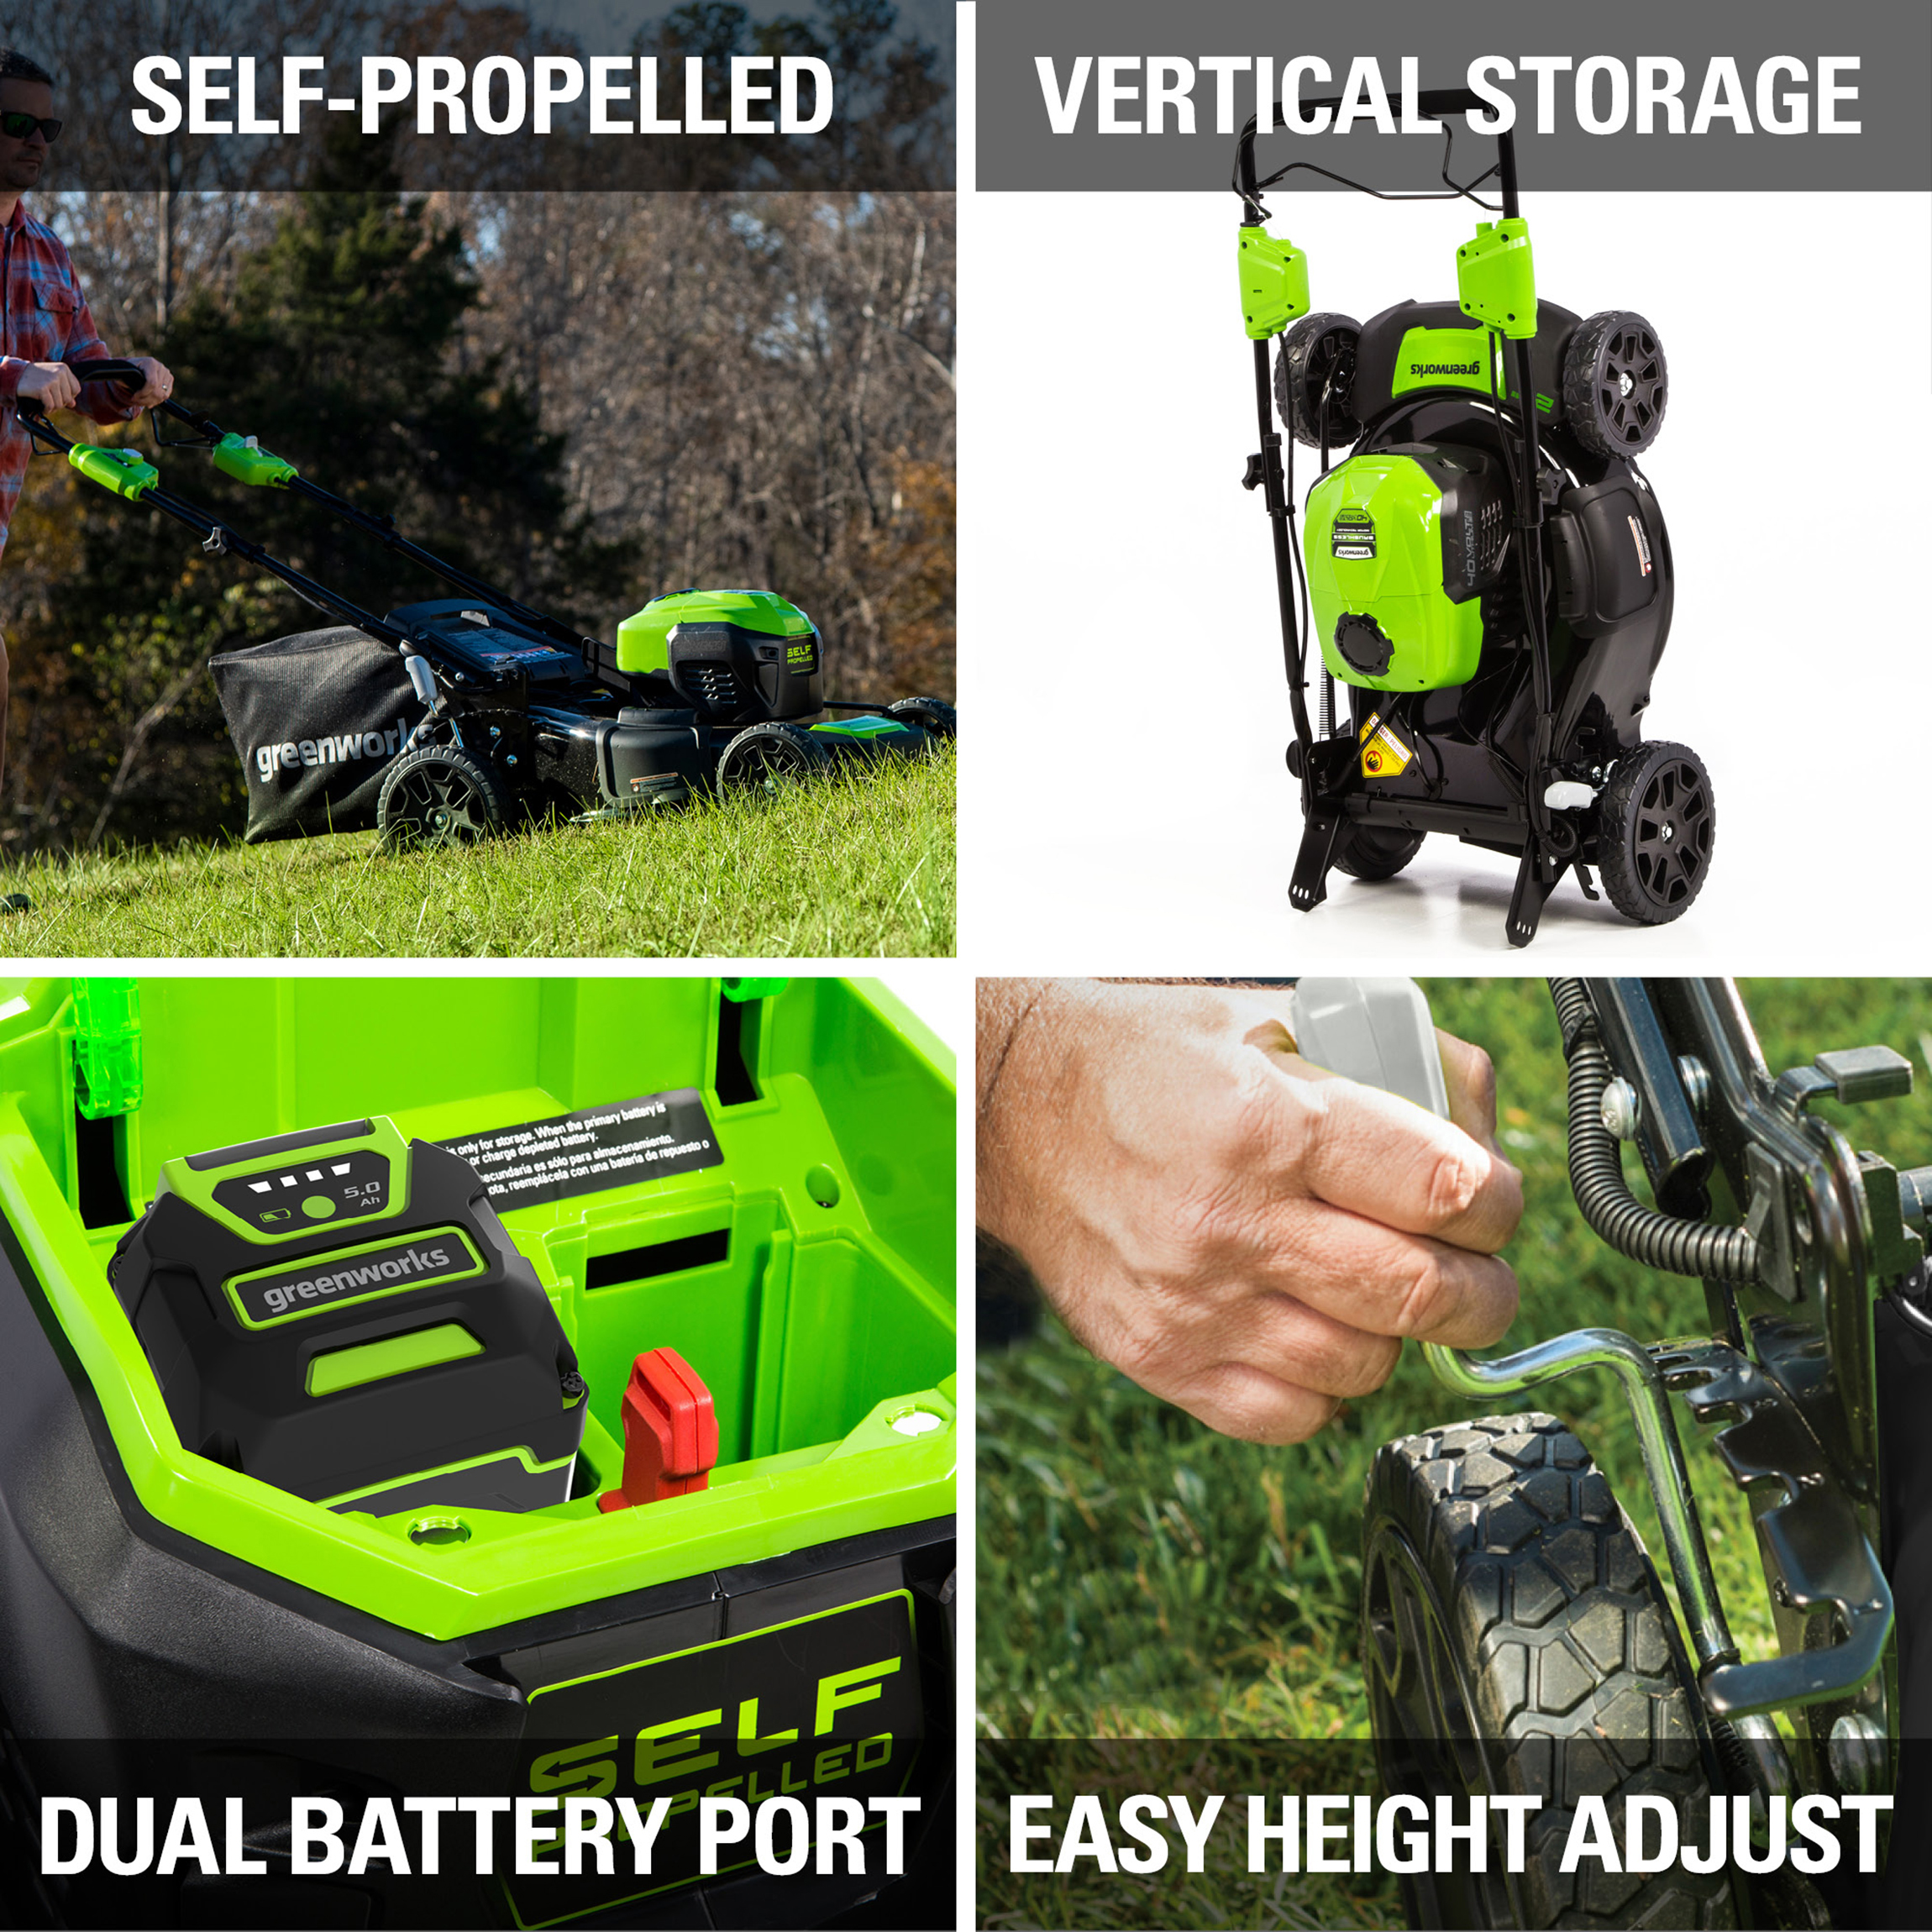 Greenworks 21" 40 Volt Battery Powered Self-Propelled Walk-Behind Mower, Battery Not Included - image 5 of 12